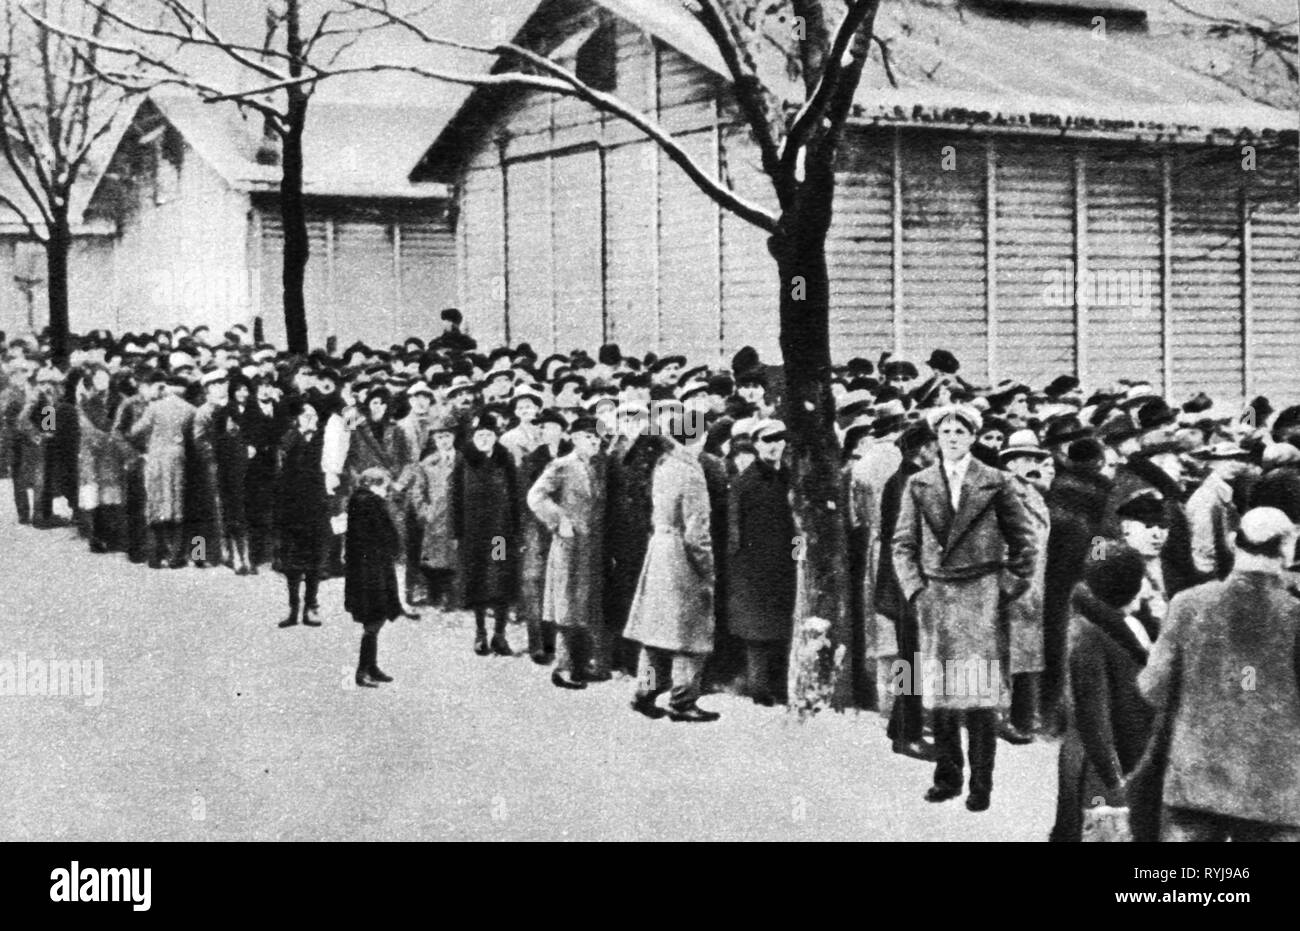 world depression 1929 - 1933, unemployment, unemployed are waiting in front of the social welfare office, Berlin, 1930, economic crisis, economic crunch, economic crises, economic crunches, waiting line, crowd, crowds, crowds of people, unemployment, jobless, wooden hut, wooden huts, unemployment benefit, unemployment benefits, misery, hardship, Germany, Free State of Prussia, German Reich, Third Reich, Weimar Republic, 20th century, 1930s, world depression, world depressions, unemployed, nonworker, workless, unemployed people, waiting, wait, his, Additional-Rights-Clearance-Info-Not-Available Stock Photo